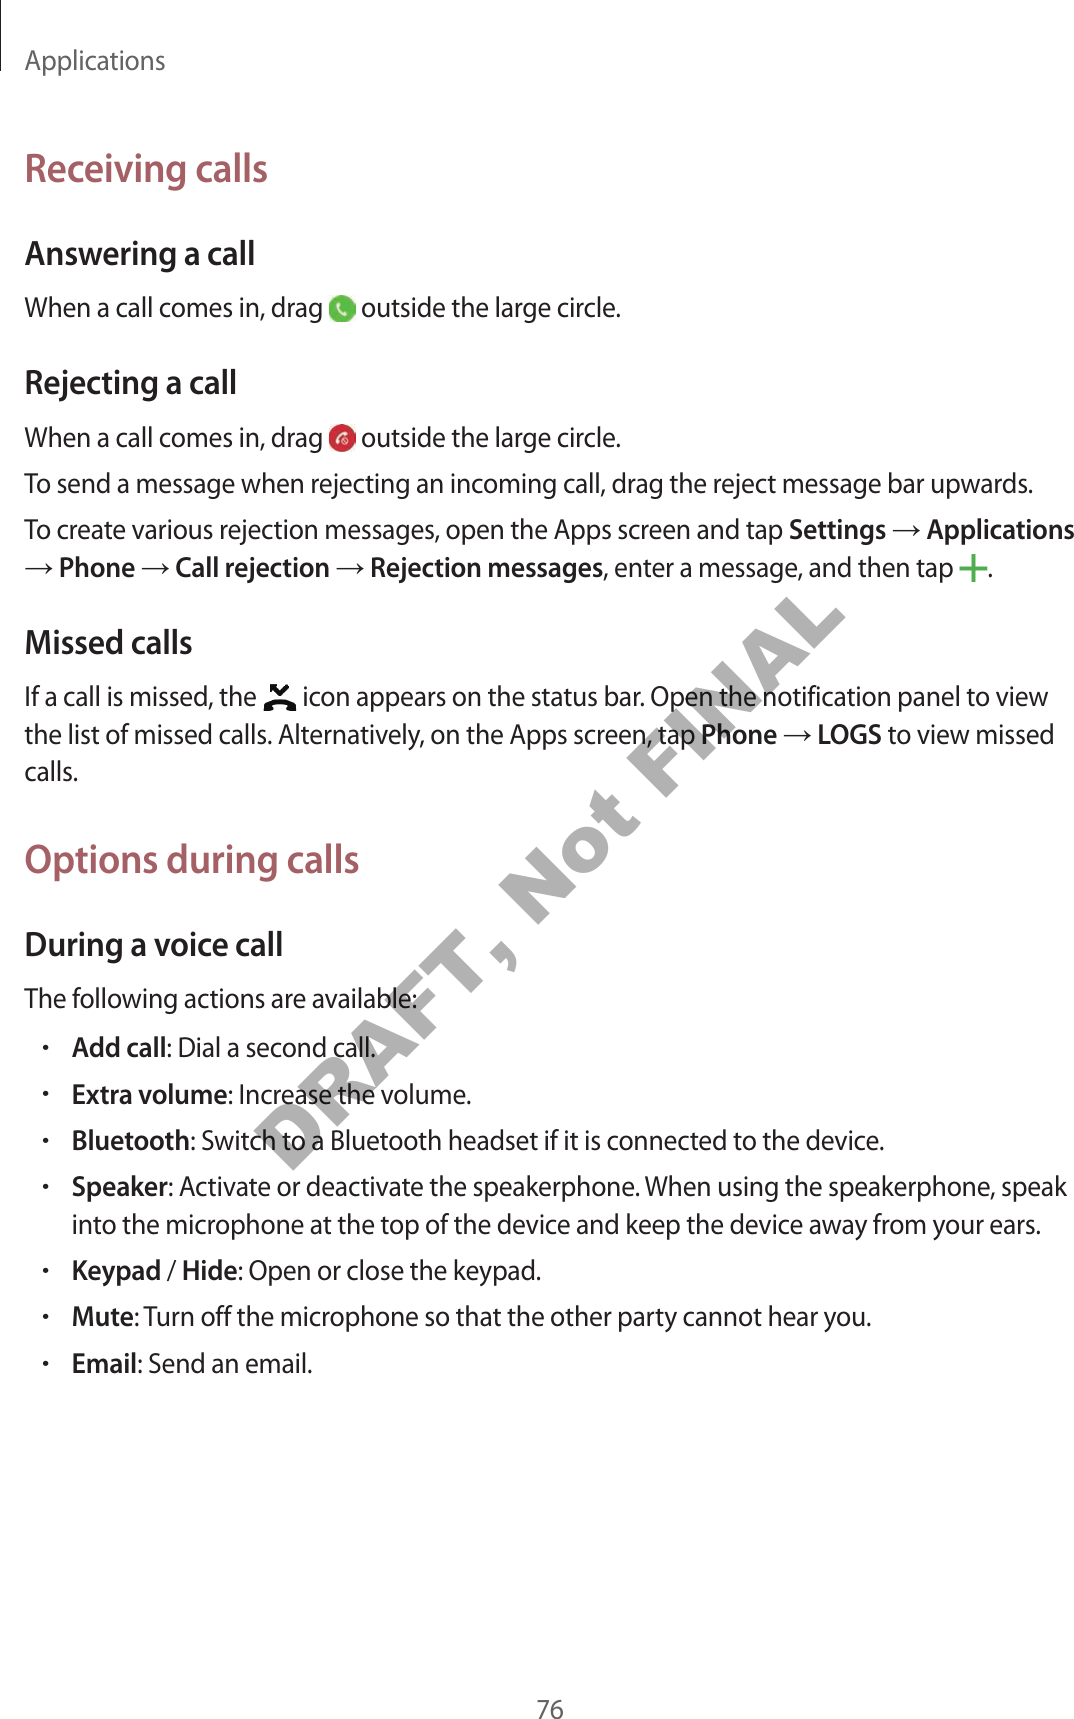 Applications76Receiving callsAnsw ering a callWhen a call comes in, drag   outside the large cir cle .Rejecting a callWhen a call comes in, drag   outside the large cir cle .To send a message when rejecting an incoming call, dr ag the r eject message bar upwards .To creat e various r ejection messages, open the Apps scr een and tap Settings  Applications  Phone  Call r ejection  Rejection messages, enter a message , and then tap  .Missed callsIf a call is missed, the   icon appears on the status bar. Open the notification panel t o view the list of missed calls. Alt ernativ ely, on the Apps scr een, tap Phone  LOGS to view missed calls.Options during callsDuring a voic e callThe f ollowing actions are a vailable:•Add call: Dial a second call.•Extra volume: Increase the volume .•Bluetooth: Switch t o a Bluetooth headset if it is c onnected to the device.•Speaker: Activate or deactivate the speakerphone . When using the speakerphone , speak into the micr ophone at the t op of the device and keep the devic e a wa y fr om y our ears .•Keypad / Hide: Open or close the keypad.•Mute: Turn off the microphone so tha t the other party cannot hear you.•Email: Send an email.DRAFT, Not FINAL